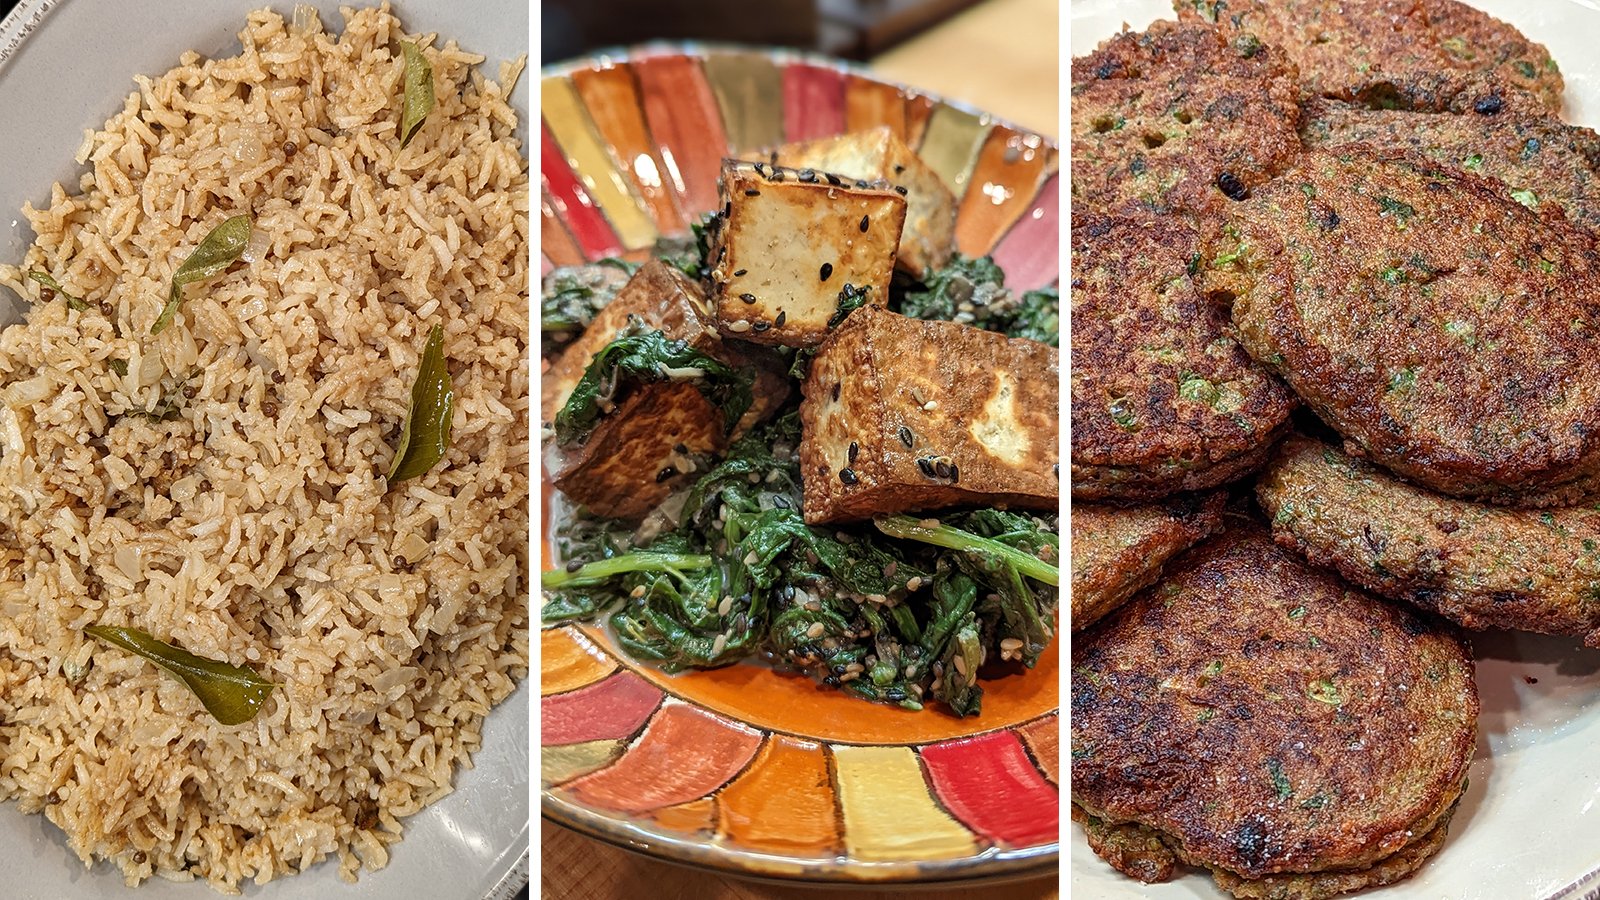 Vegetarian Brunch: Indian-Style Pea Fritters, Saag Paneer and Spiced Rice